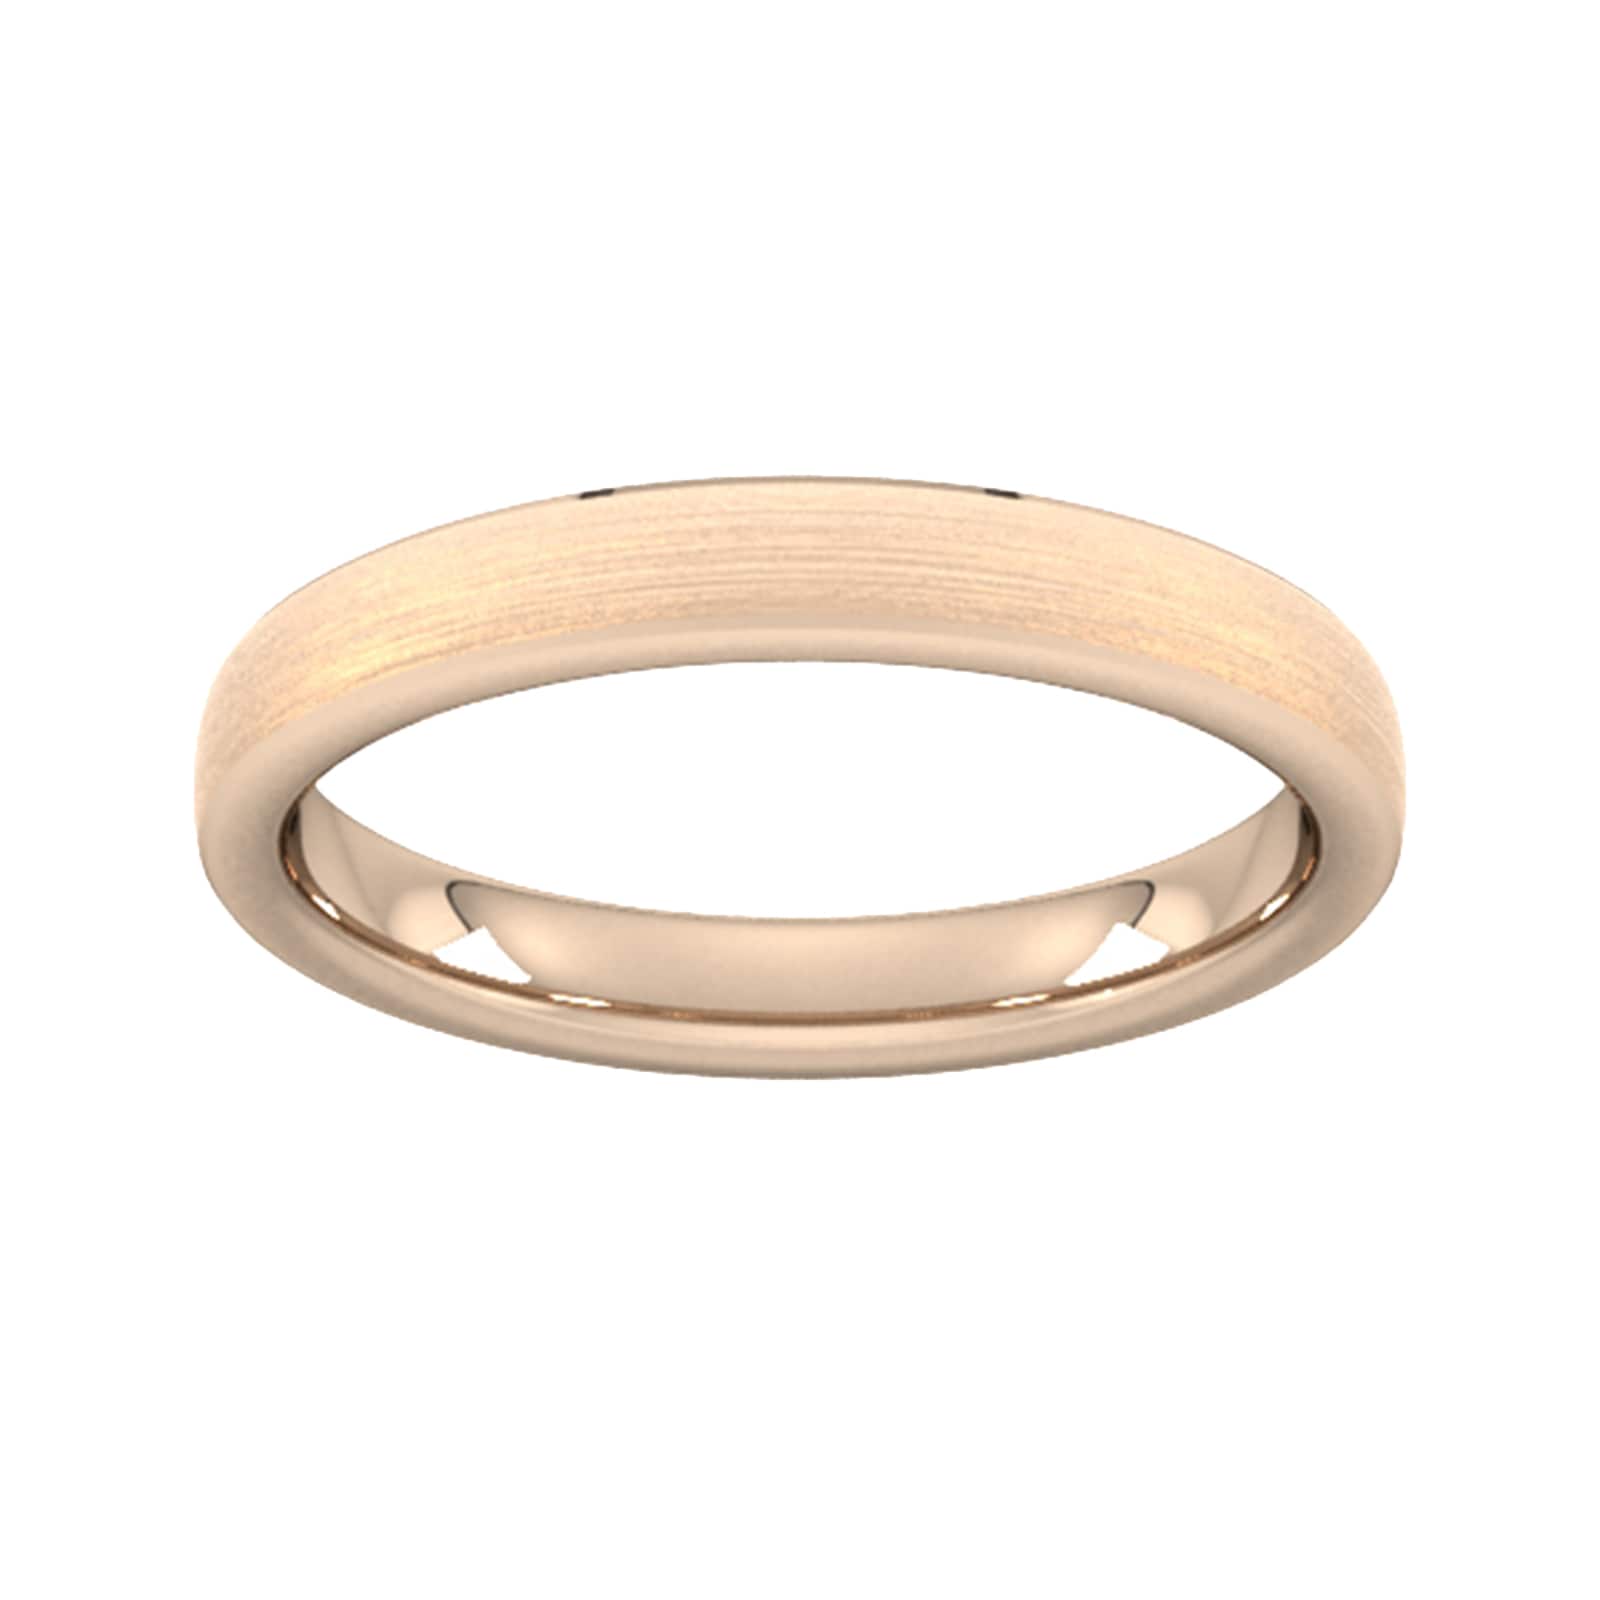 3mm Slight Court Extra Heavy Polished Chamfered Edges With Matt Centre Wedding Ring In 18 Carat Rose Gold - Ring Size G